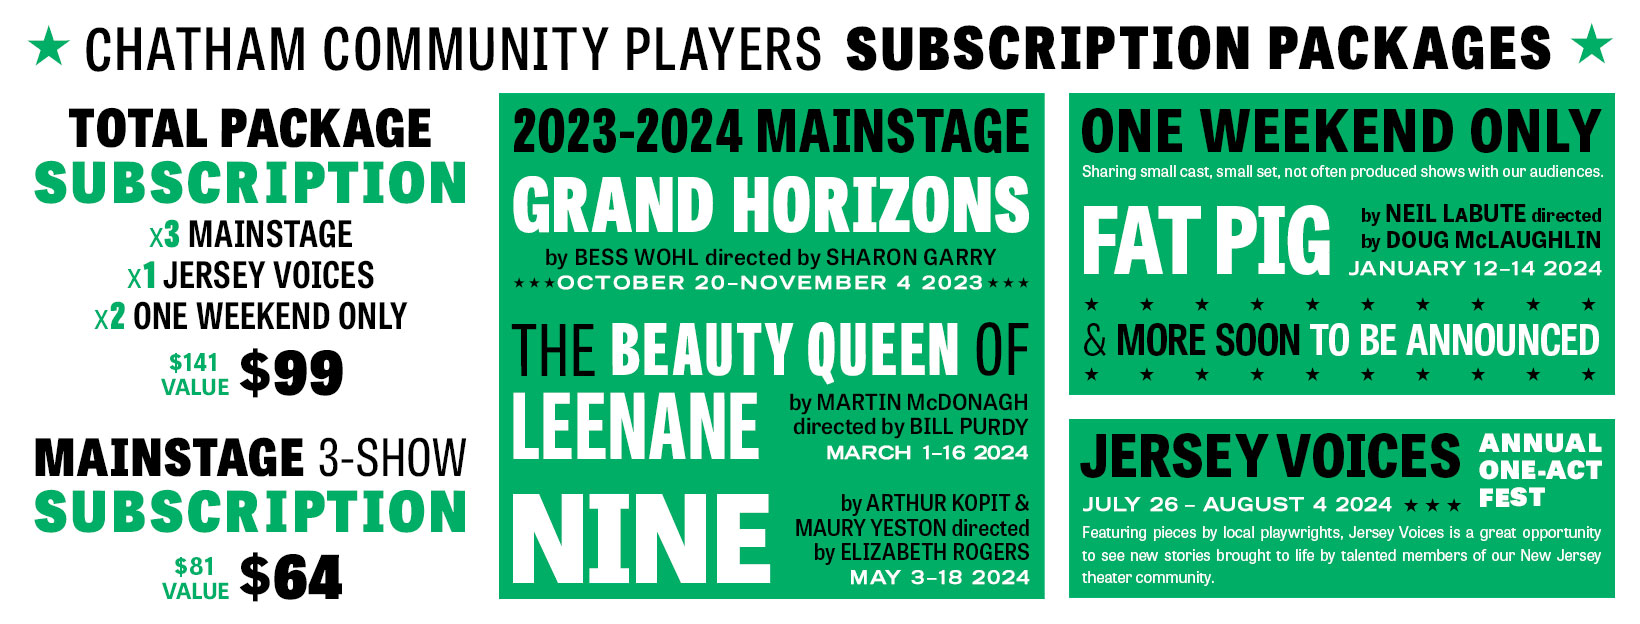 Chatham Players Subscriptions 2023-24